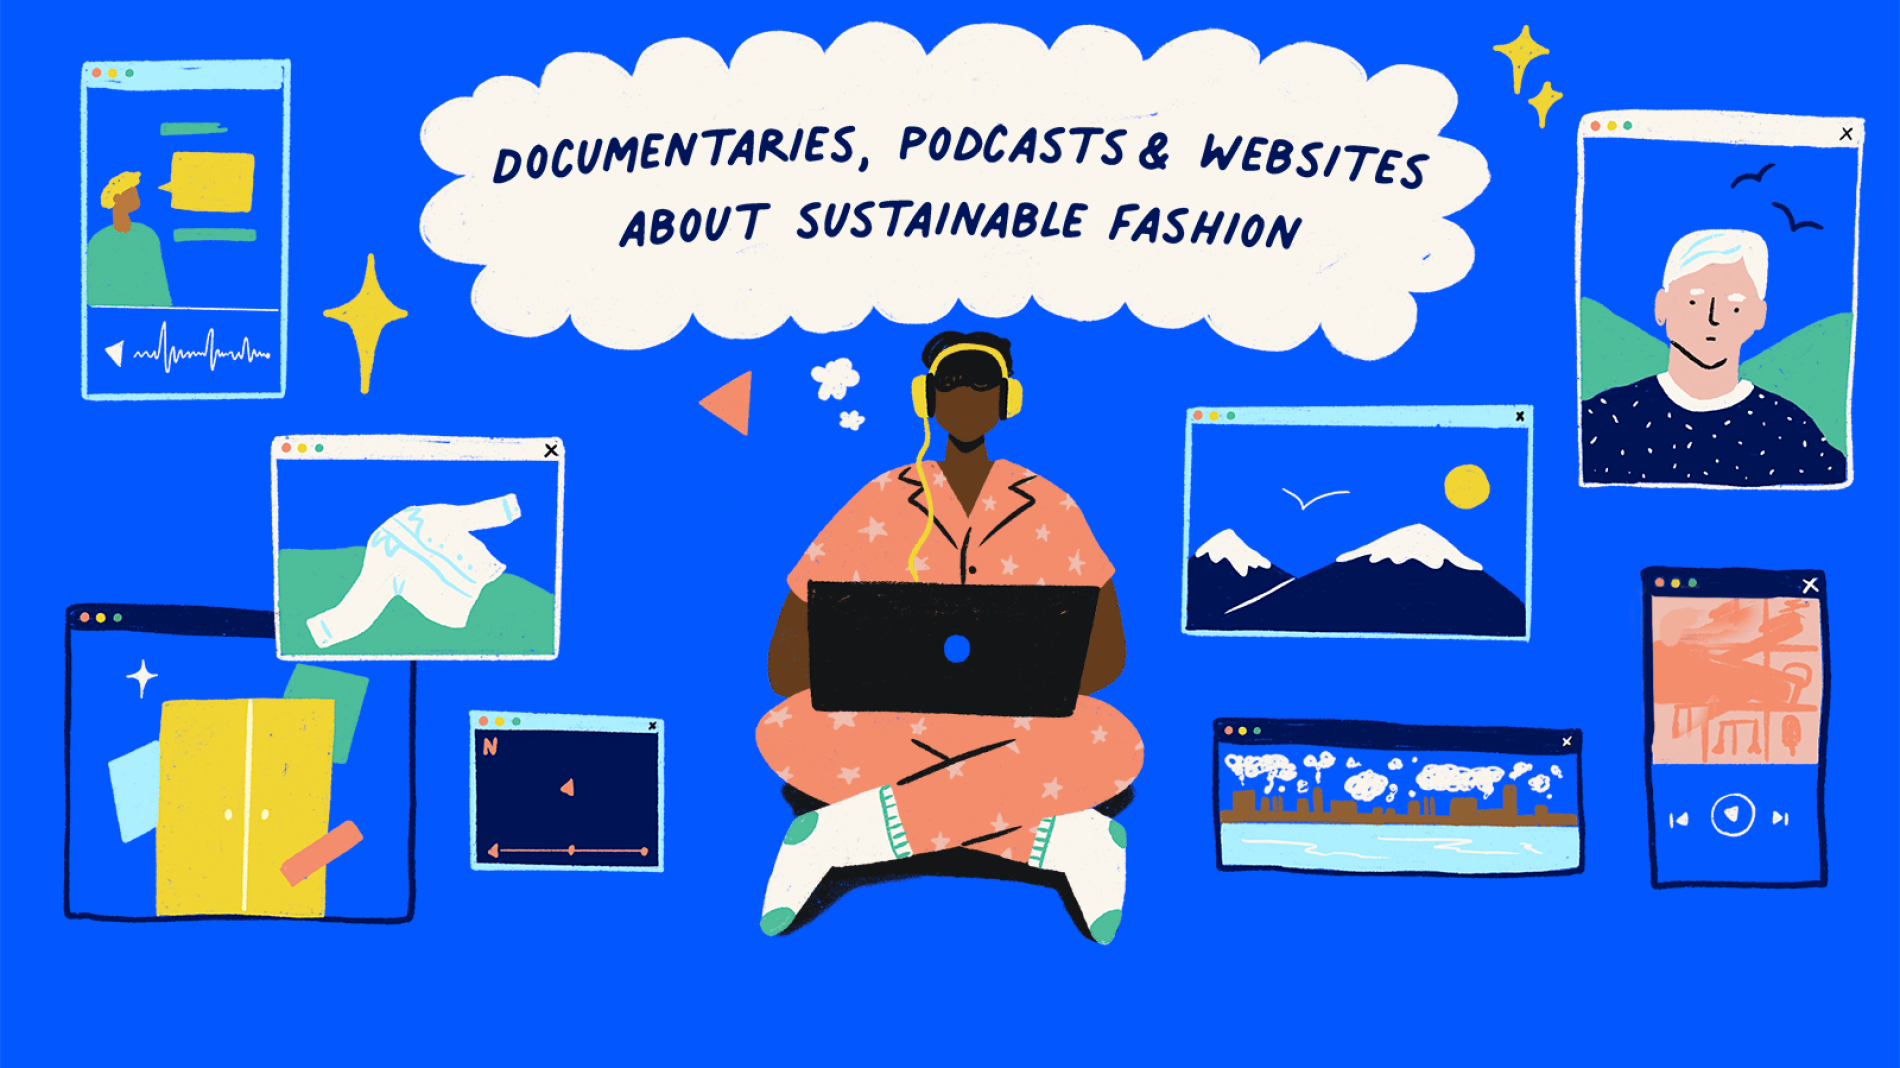 sustainable_fashion_documentaries_podcasts_websites